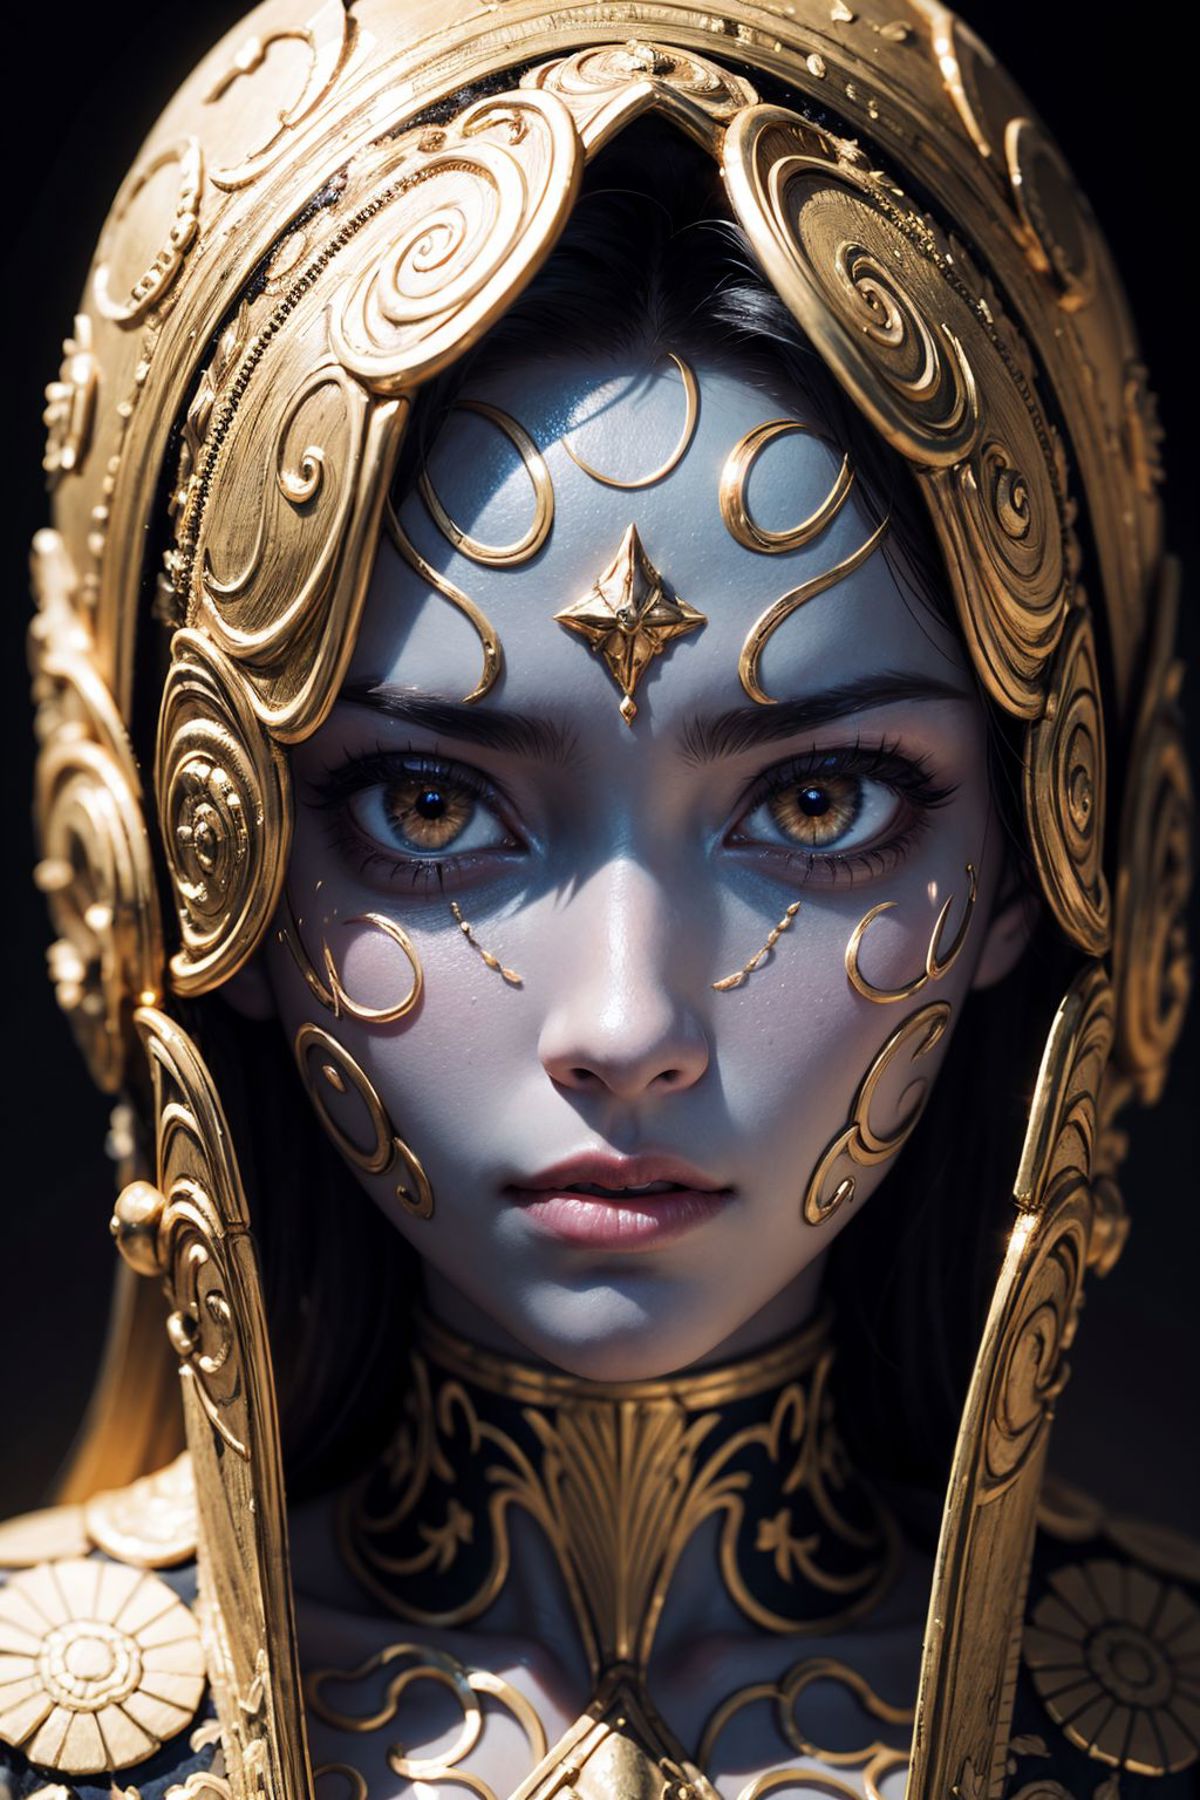 A beautiful face with a gold headband and gold decorations on her face and forehead.